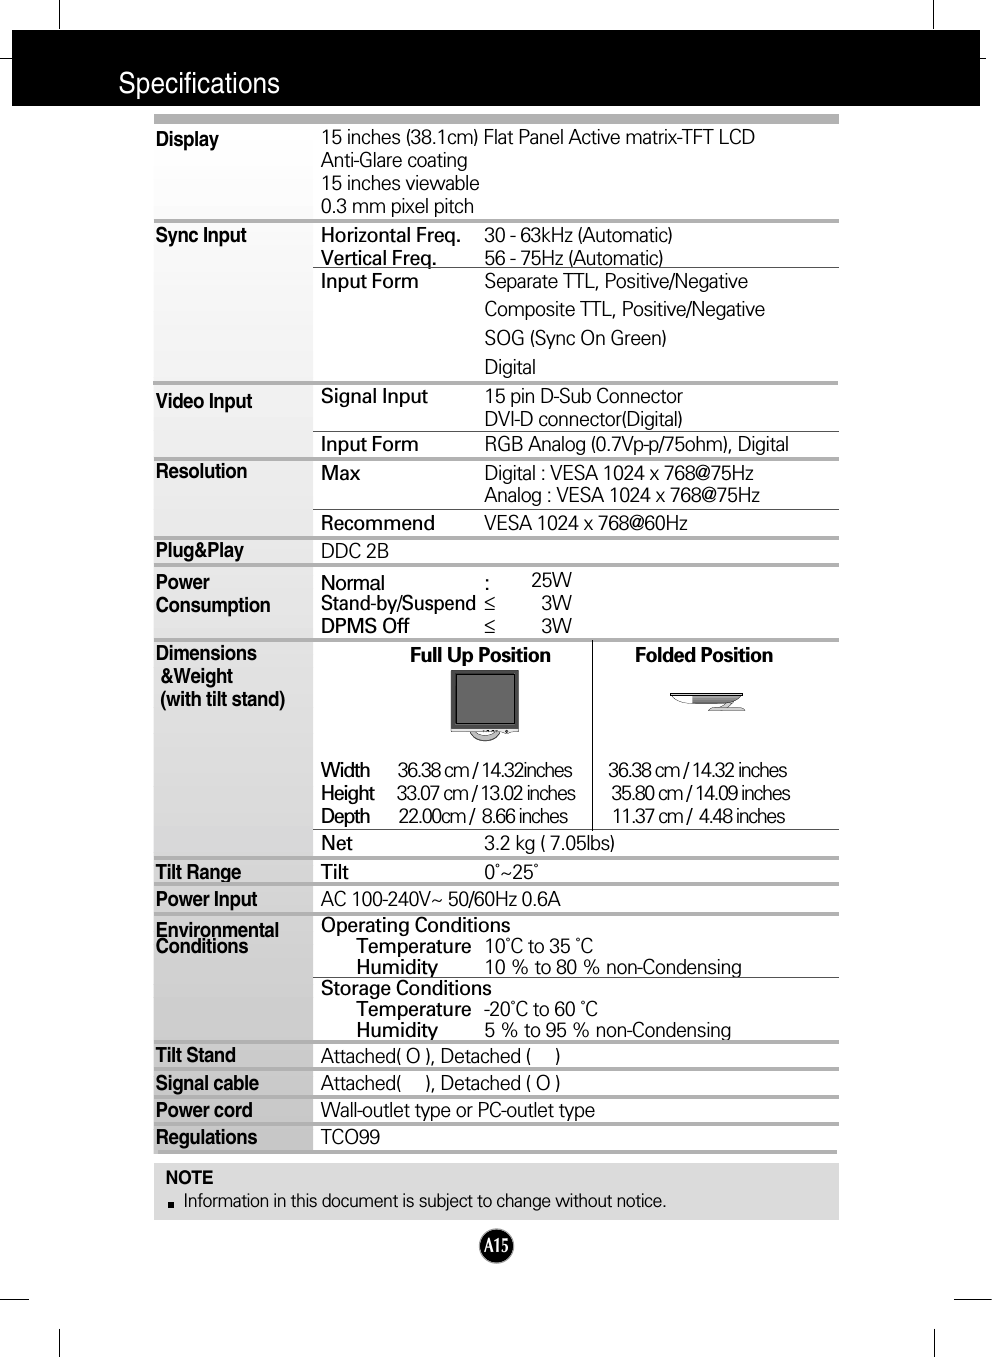 A15SpecificationsNOTEInformation in this document is subject to change without notice.15 inches (38.1cm) Flat Panel Active matrix-TFT LCD Anti-Glare coating15 inches viewable0.3 mm pixel pitchHorizontal Freq. 30 - 63kHz (Automatic)Vertical Freq. 56 - 75Hz (Automatic)Input Form Separate TTL, Positive/NegativeComposite TTL, Positive/NegativeSOG (Sync On Green)DigitalSignal Input 15 pin D-Sub ConnectorDVI-D connector(Digital)Input Form RGB Analog (0.7Vp-p/75ohm), DigitalMax Digital : VESA 1024 x 768@75Hz Analog : VESA 1024 x 768@75Hz Recommend VESA 1024 x 768@60HzDDC 2BNormal :25WStand-by/Suspend≤3WDPMS Off ≤3WFull Up Position                 Folded PositionWidth   36.38 cm / 14.32inches         36.38 cm / 14.32 inchesHeight   33.07 cm / 13.02 inches         35.80 cm / 14.09 inchesDepth  22.00cm /  8.66 inches           11.37 cm /  4.48 inchesNet 3.2 kg ( 7.05lbs)Tilt 0˚~25˚AC 100-240V~ 50/60Hz 0.6AOperating ConditionsTemperature 10˚C to 35 ˚CHumidity 10 % to 80 % non-CondensingStorage ConditionsTemperature -20˚C to 60 ˚CHumidity 5 % to 95 % non-CondensingAttached( O ), Detached (     )Attached(     ), Detached ( O )Wall-outlet type or PC-outlet typeTCO99DisplaySync InputVideo InputResolutionPlug&amp;PlayPowerConsumptionDimensions&amp;Weight(with tilt stand)Tilt RangePower InputEnvironmentalConditionsTilt StandSignal cablePower cord Regulations